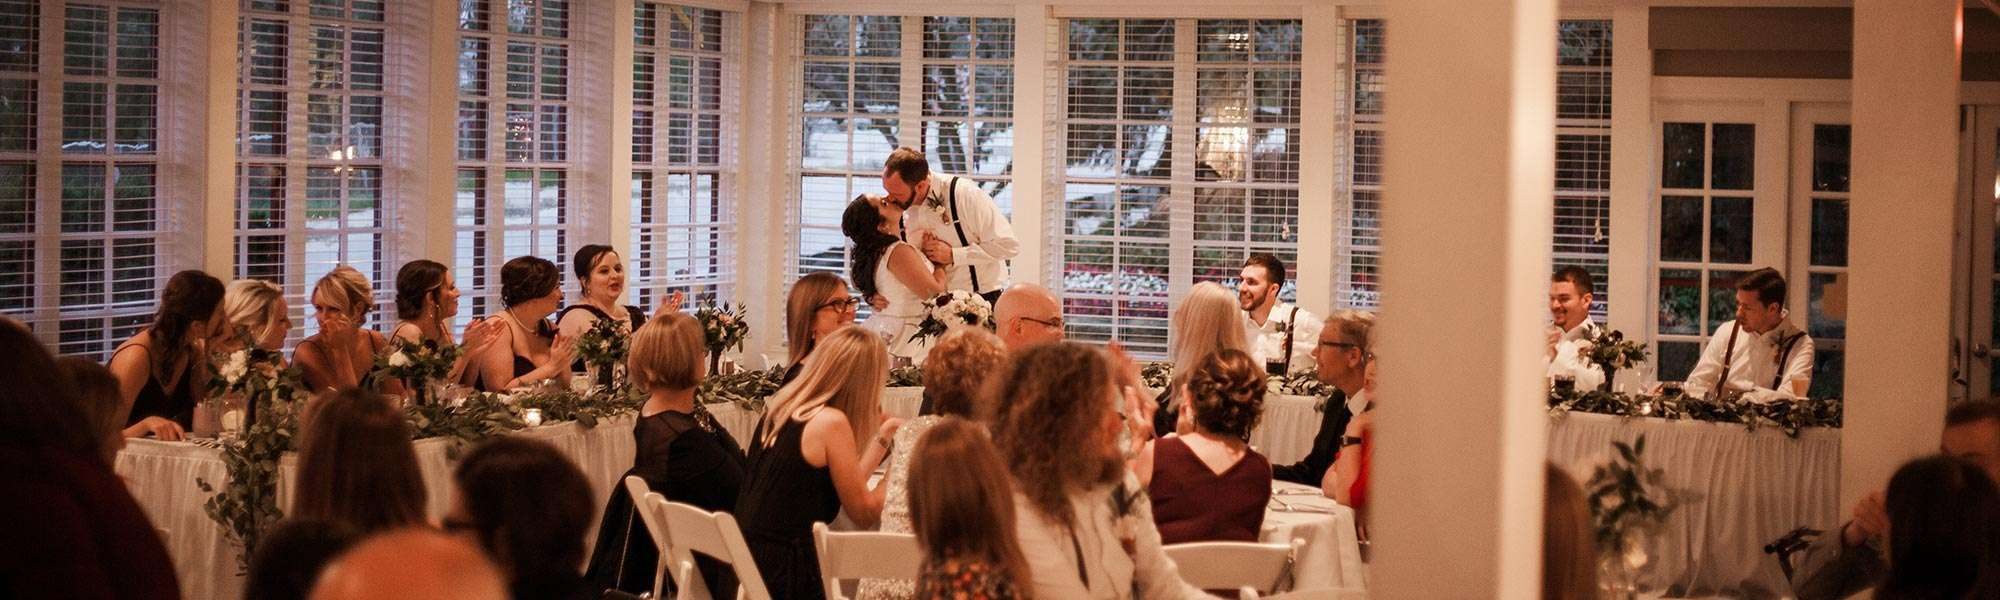 Bride and groom kiss at their Red Circle Inn wedding reception.